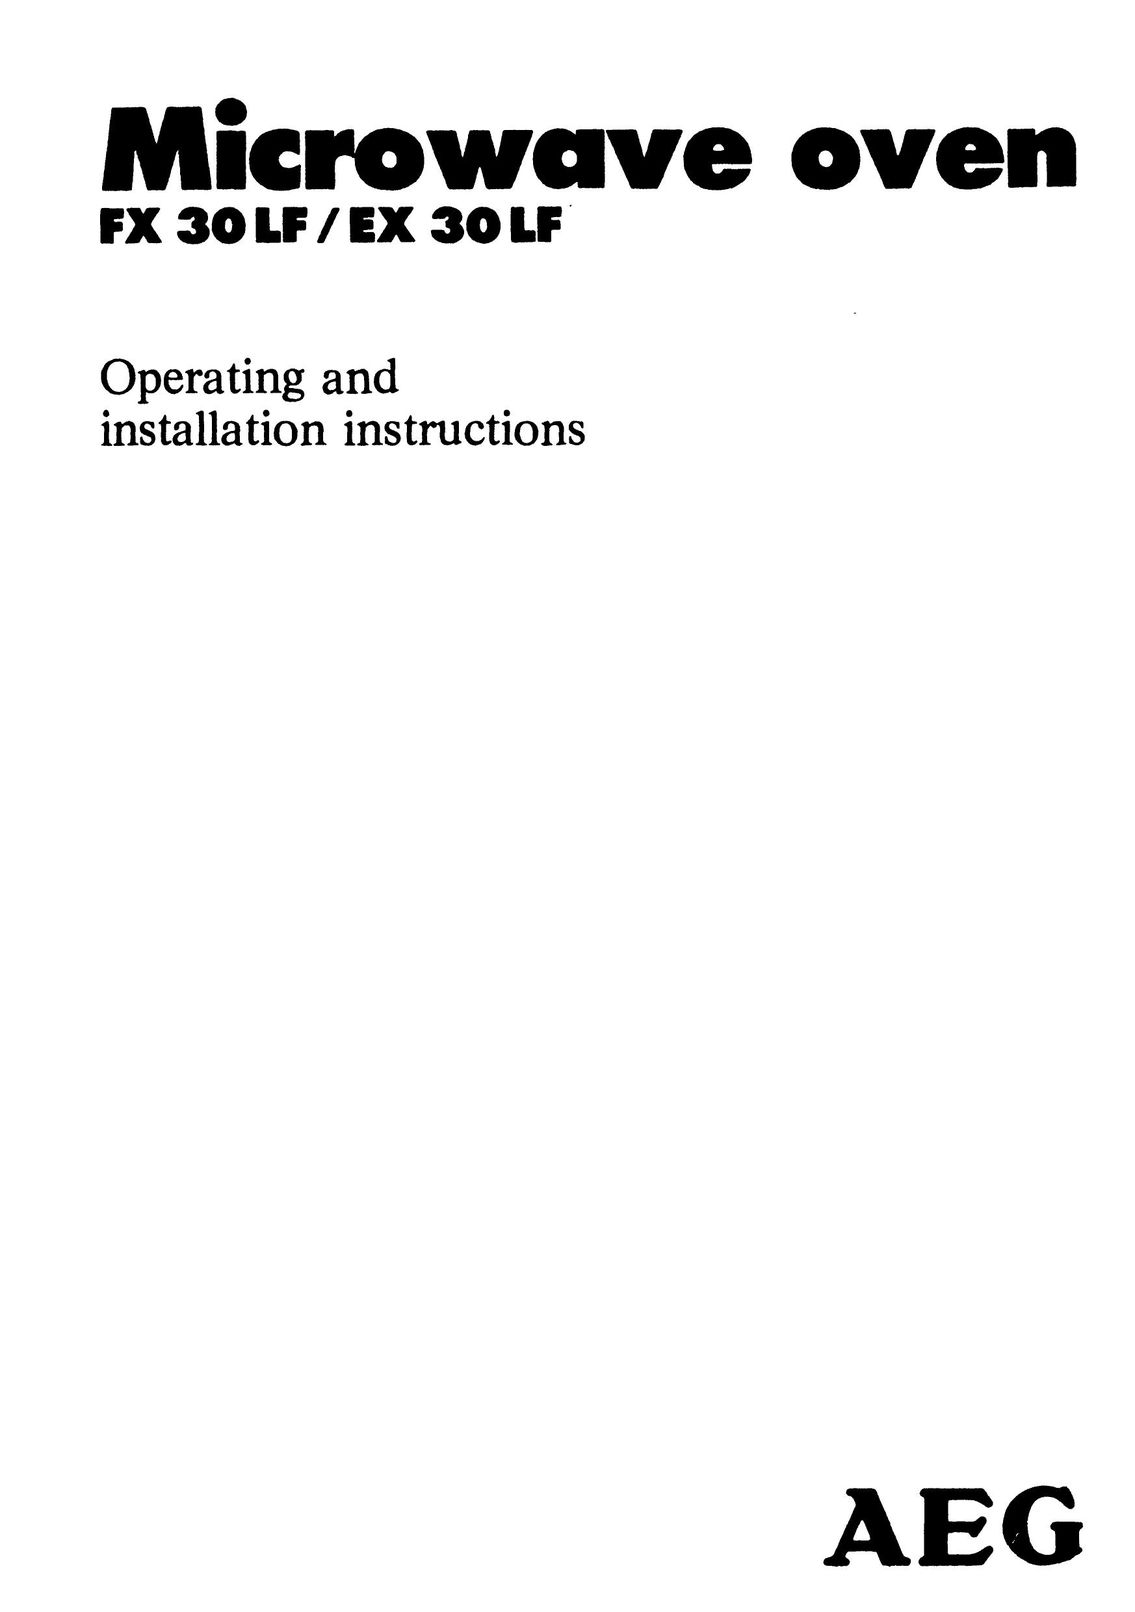 Aegis Micro EX 30LF Microwave Oven User Manual (Page 1)